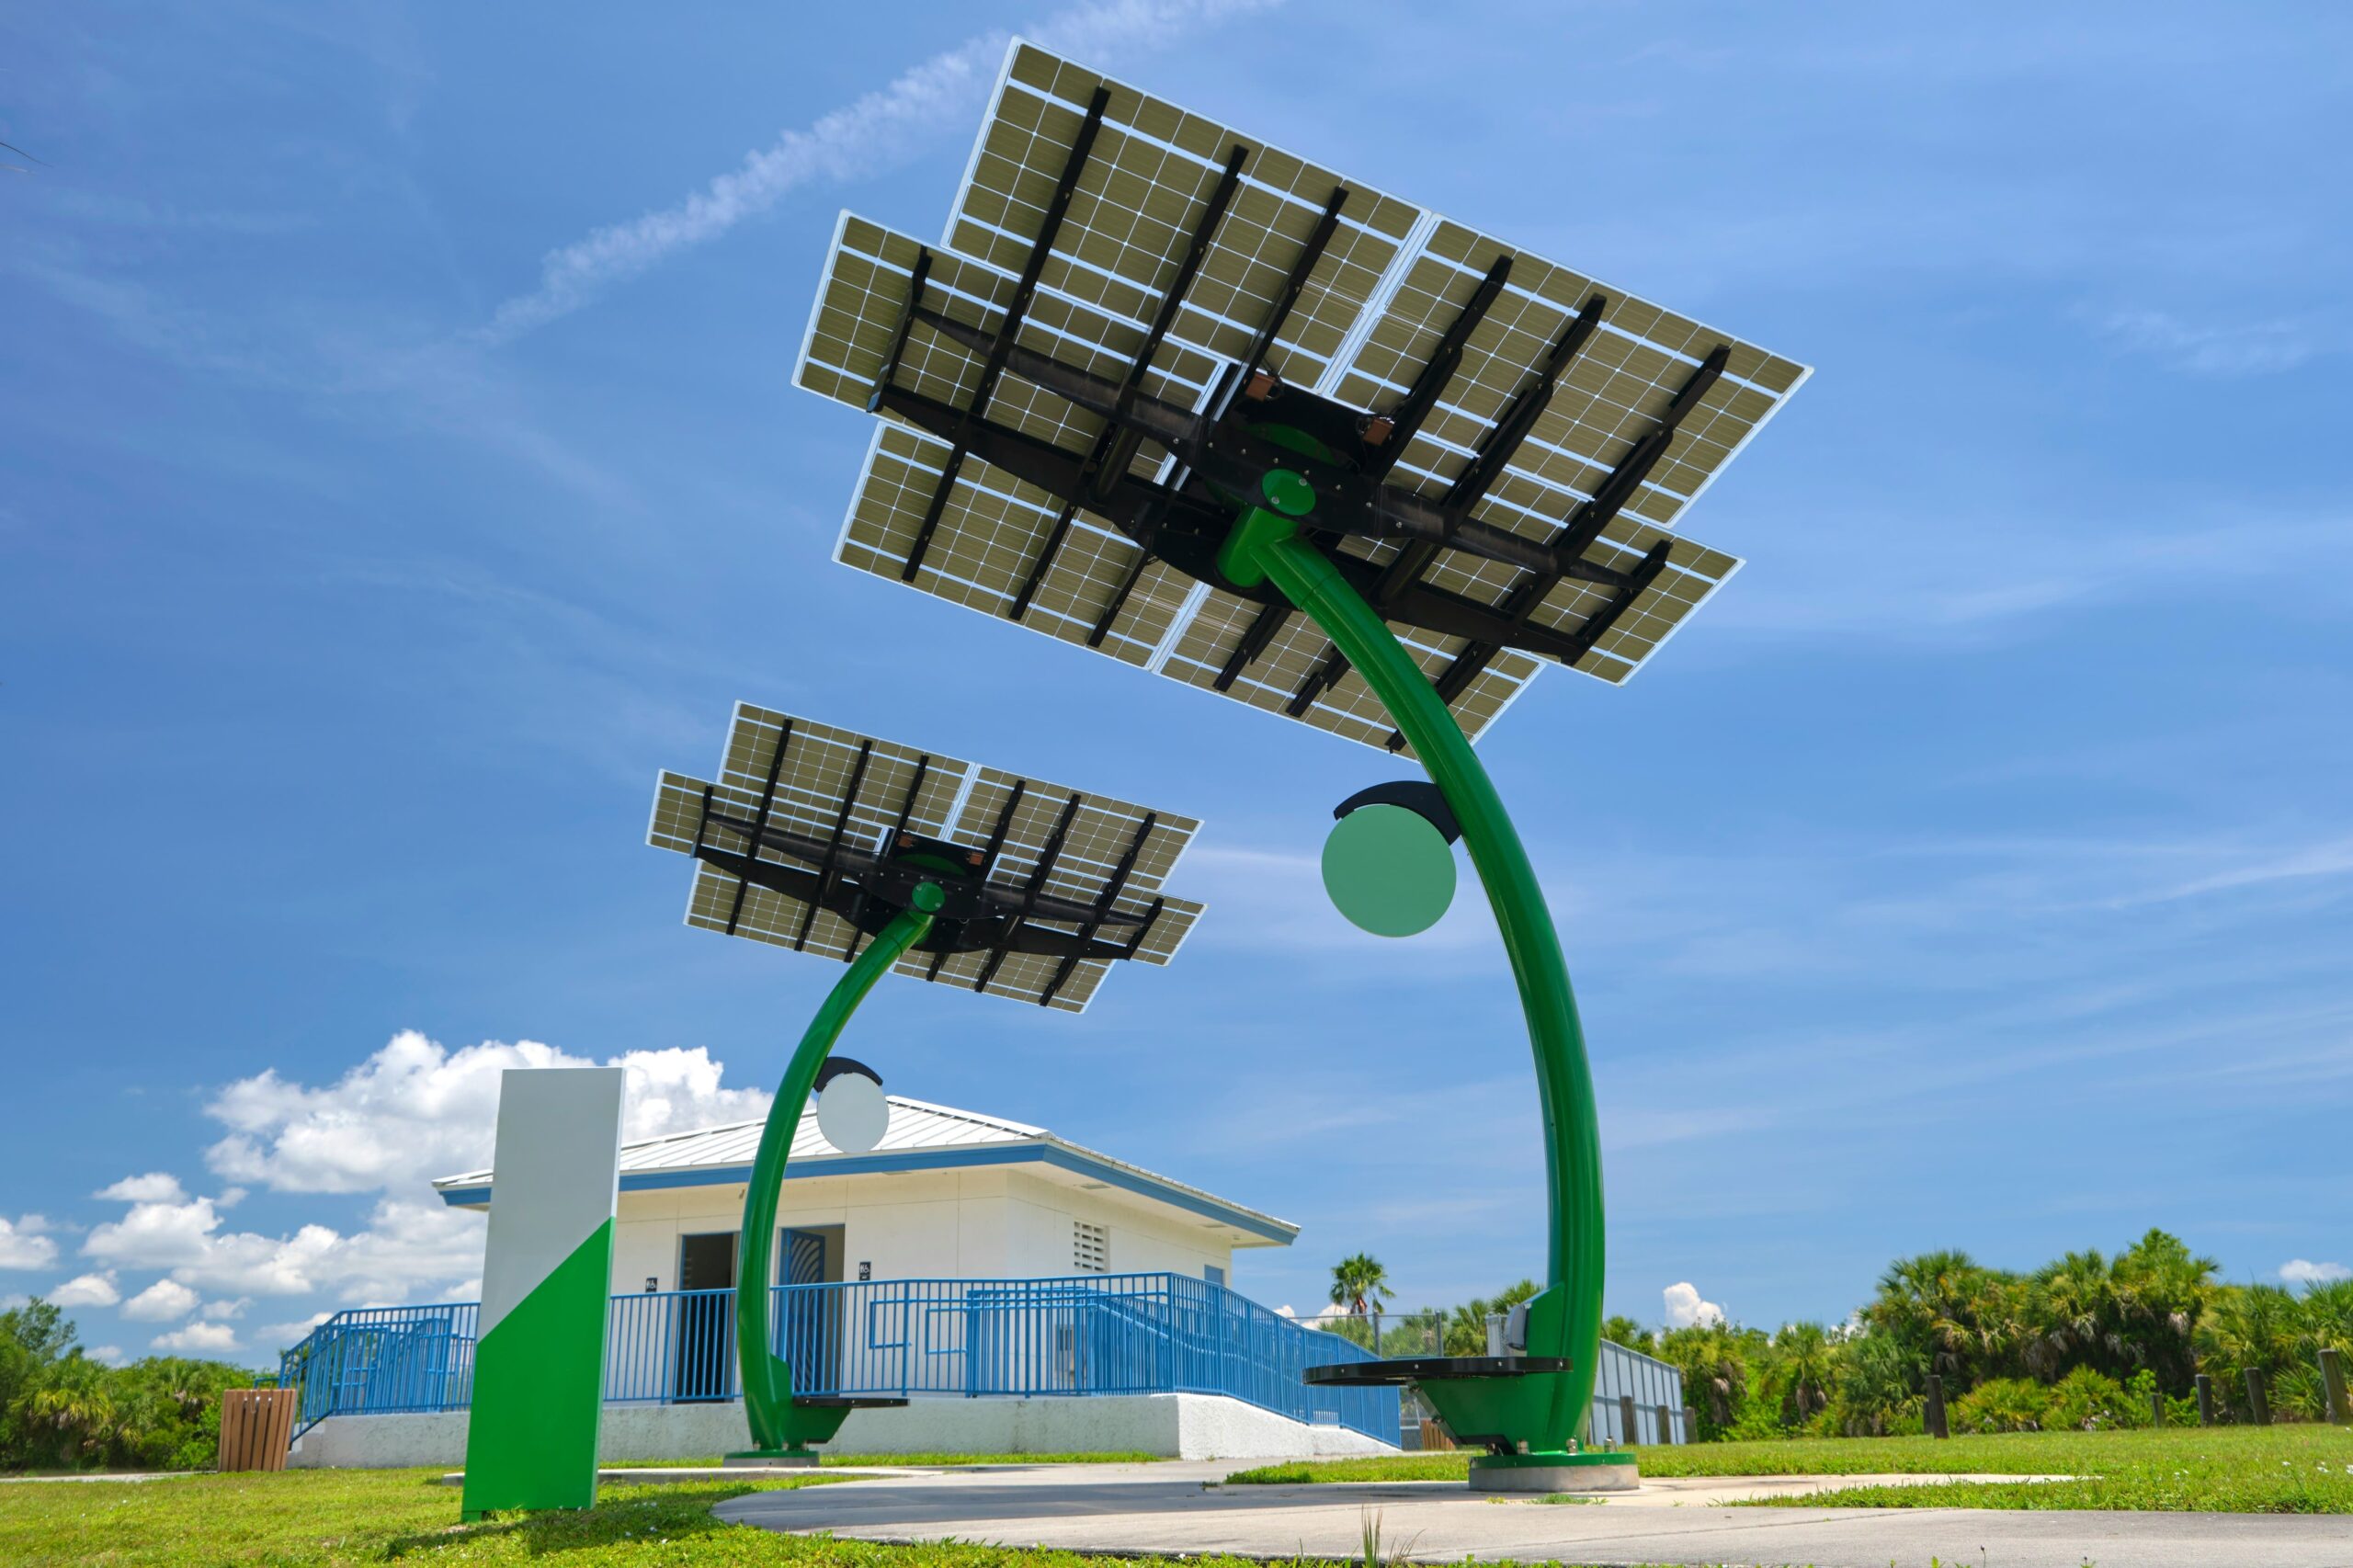 Innovative solar panel installations with a unique design in a park setting, showcasing modern solar energy solutions.